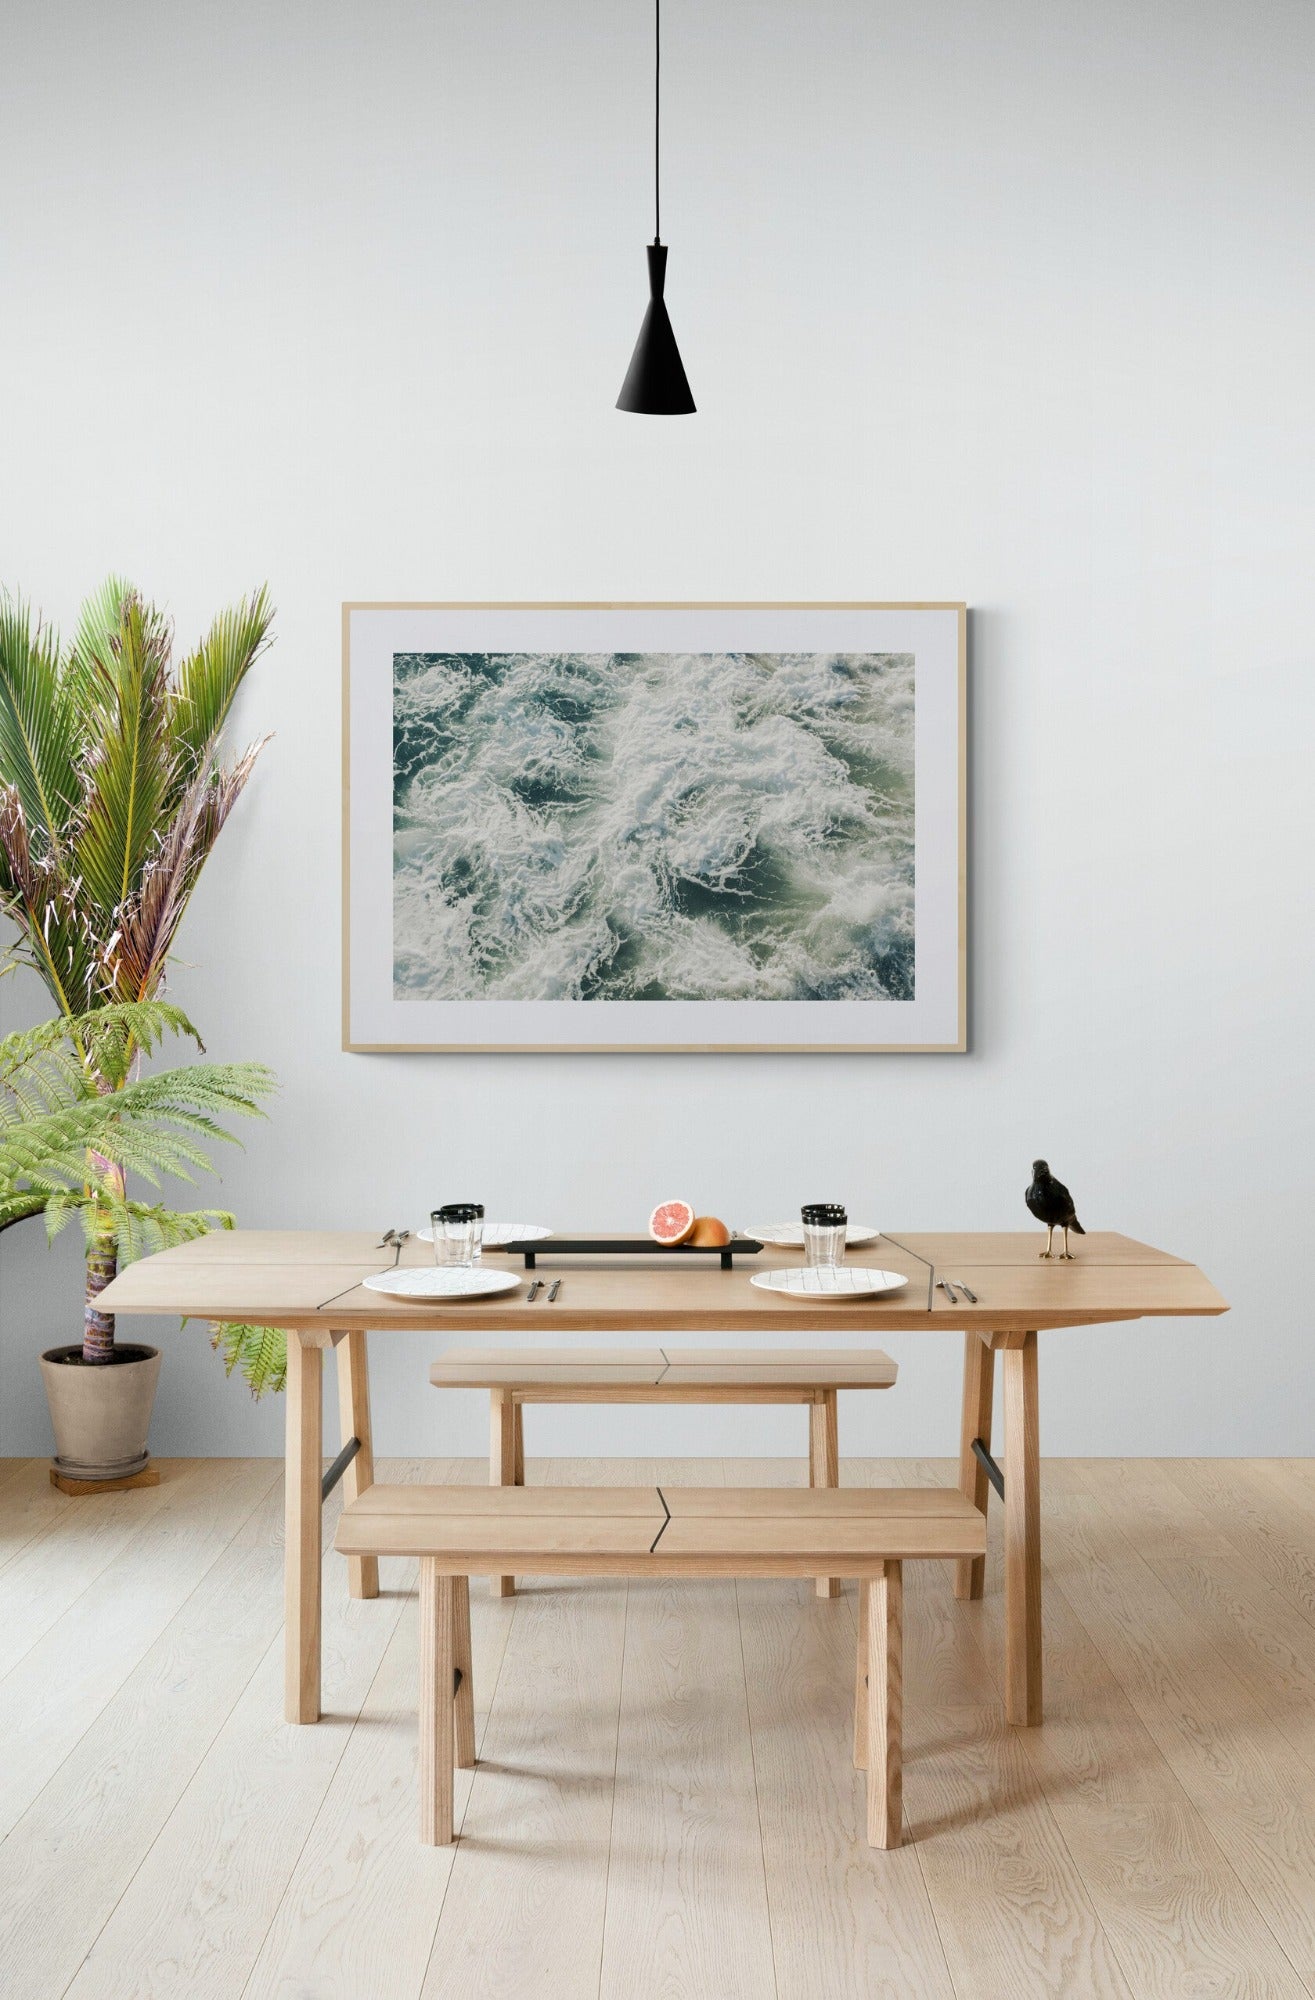 Pacific Ocean Waters Aerial Photograph as Wall Art in a Dining Room